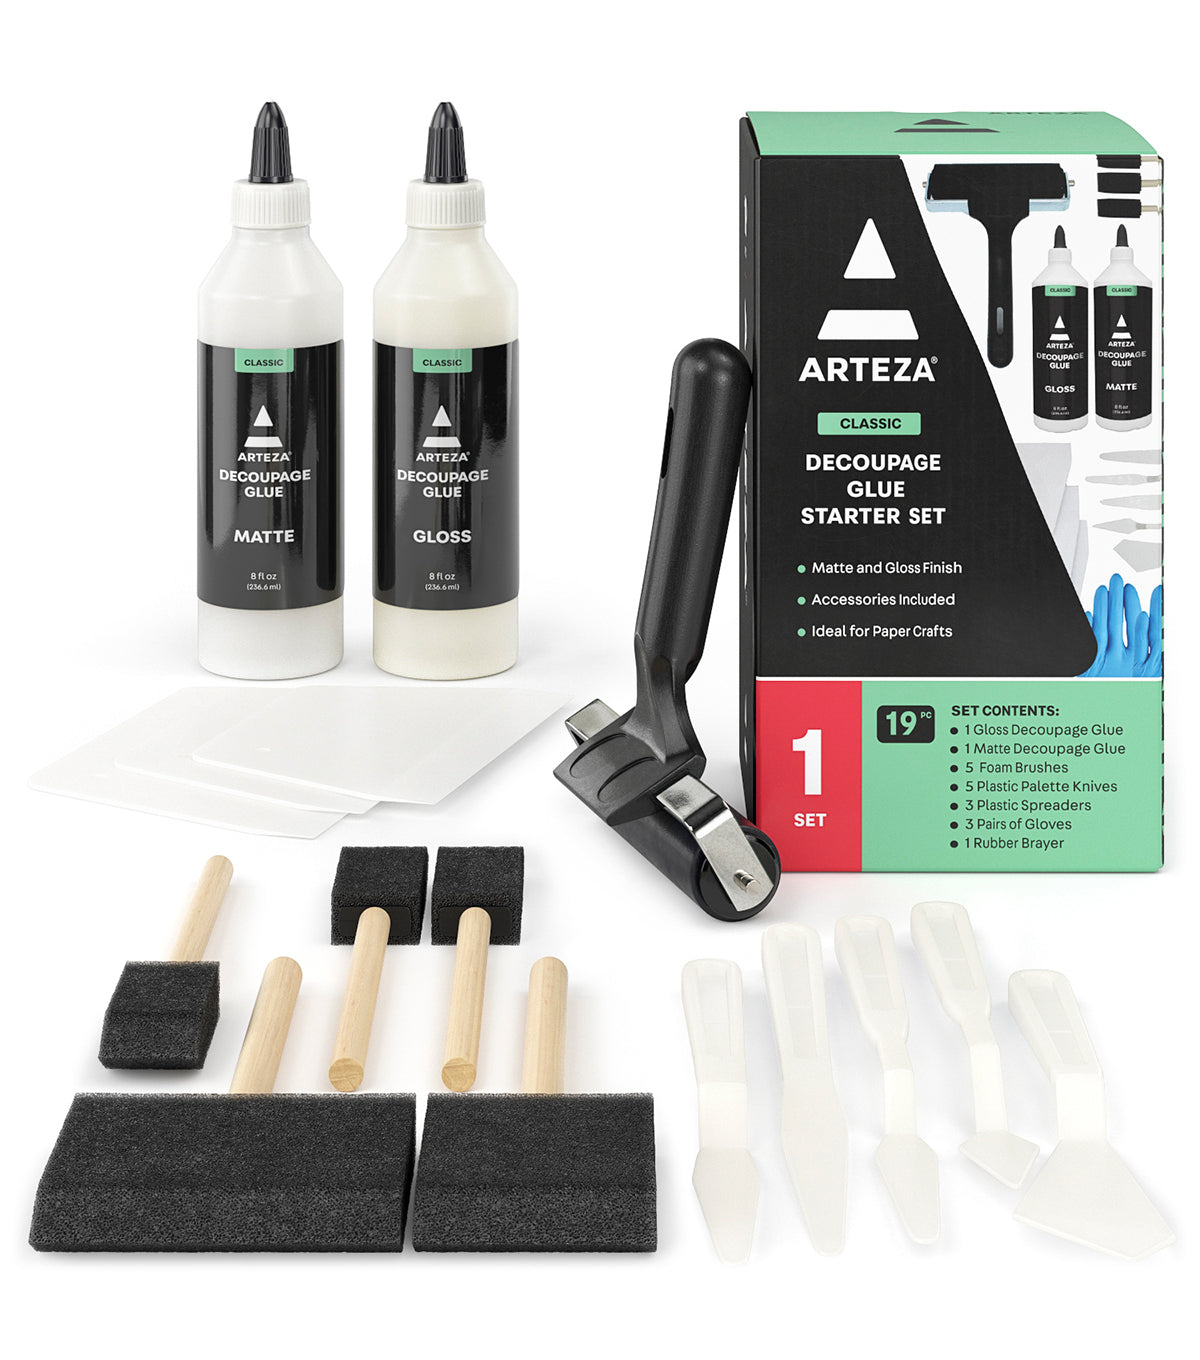  ARTEZA All-Purpose Craft Glue, 4-Pack, Fast-Drying Clear Glue  for Crafts, Ideal for Wood, Fabric, Plastic, Glass, Metal, Ceramic,  Jewelry, Model, Paper, Fabric Fusion and No Sew Projects : Arts, Crafts